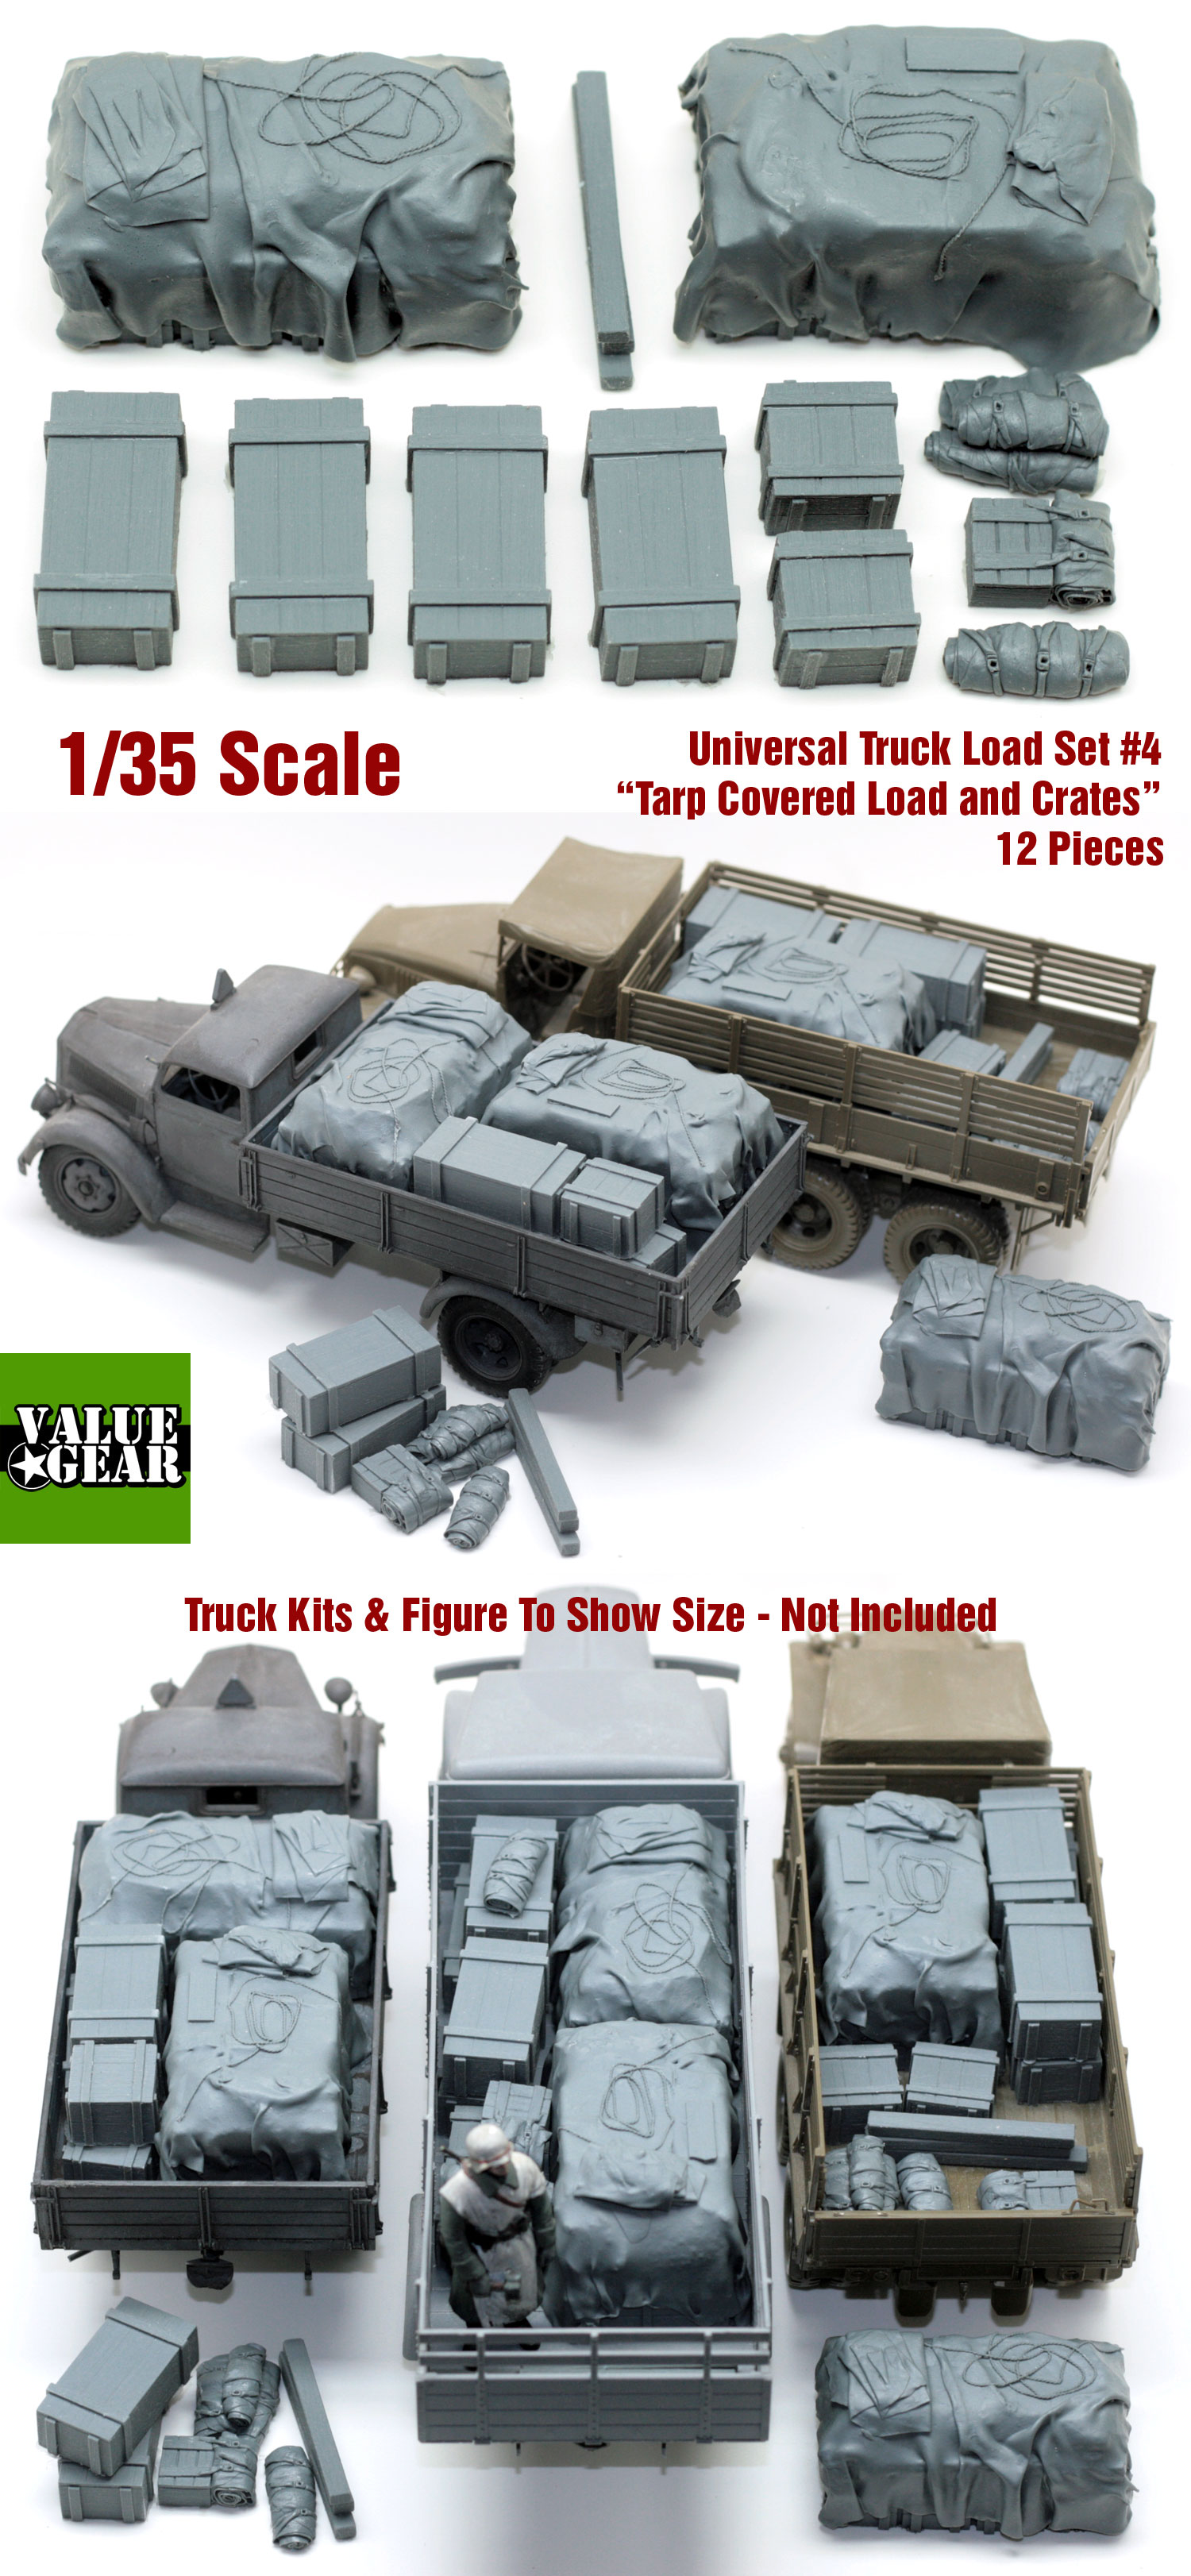 Generic Truckload Large Equipment Crates #1 1/35 Scale resin kit Universal 